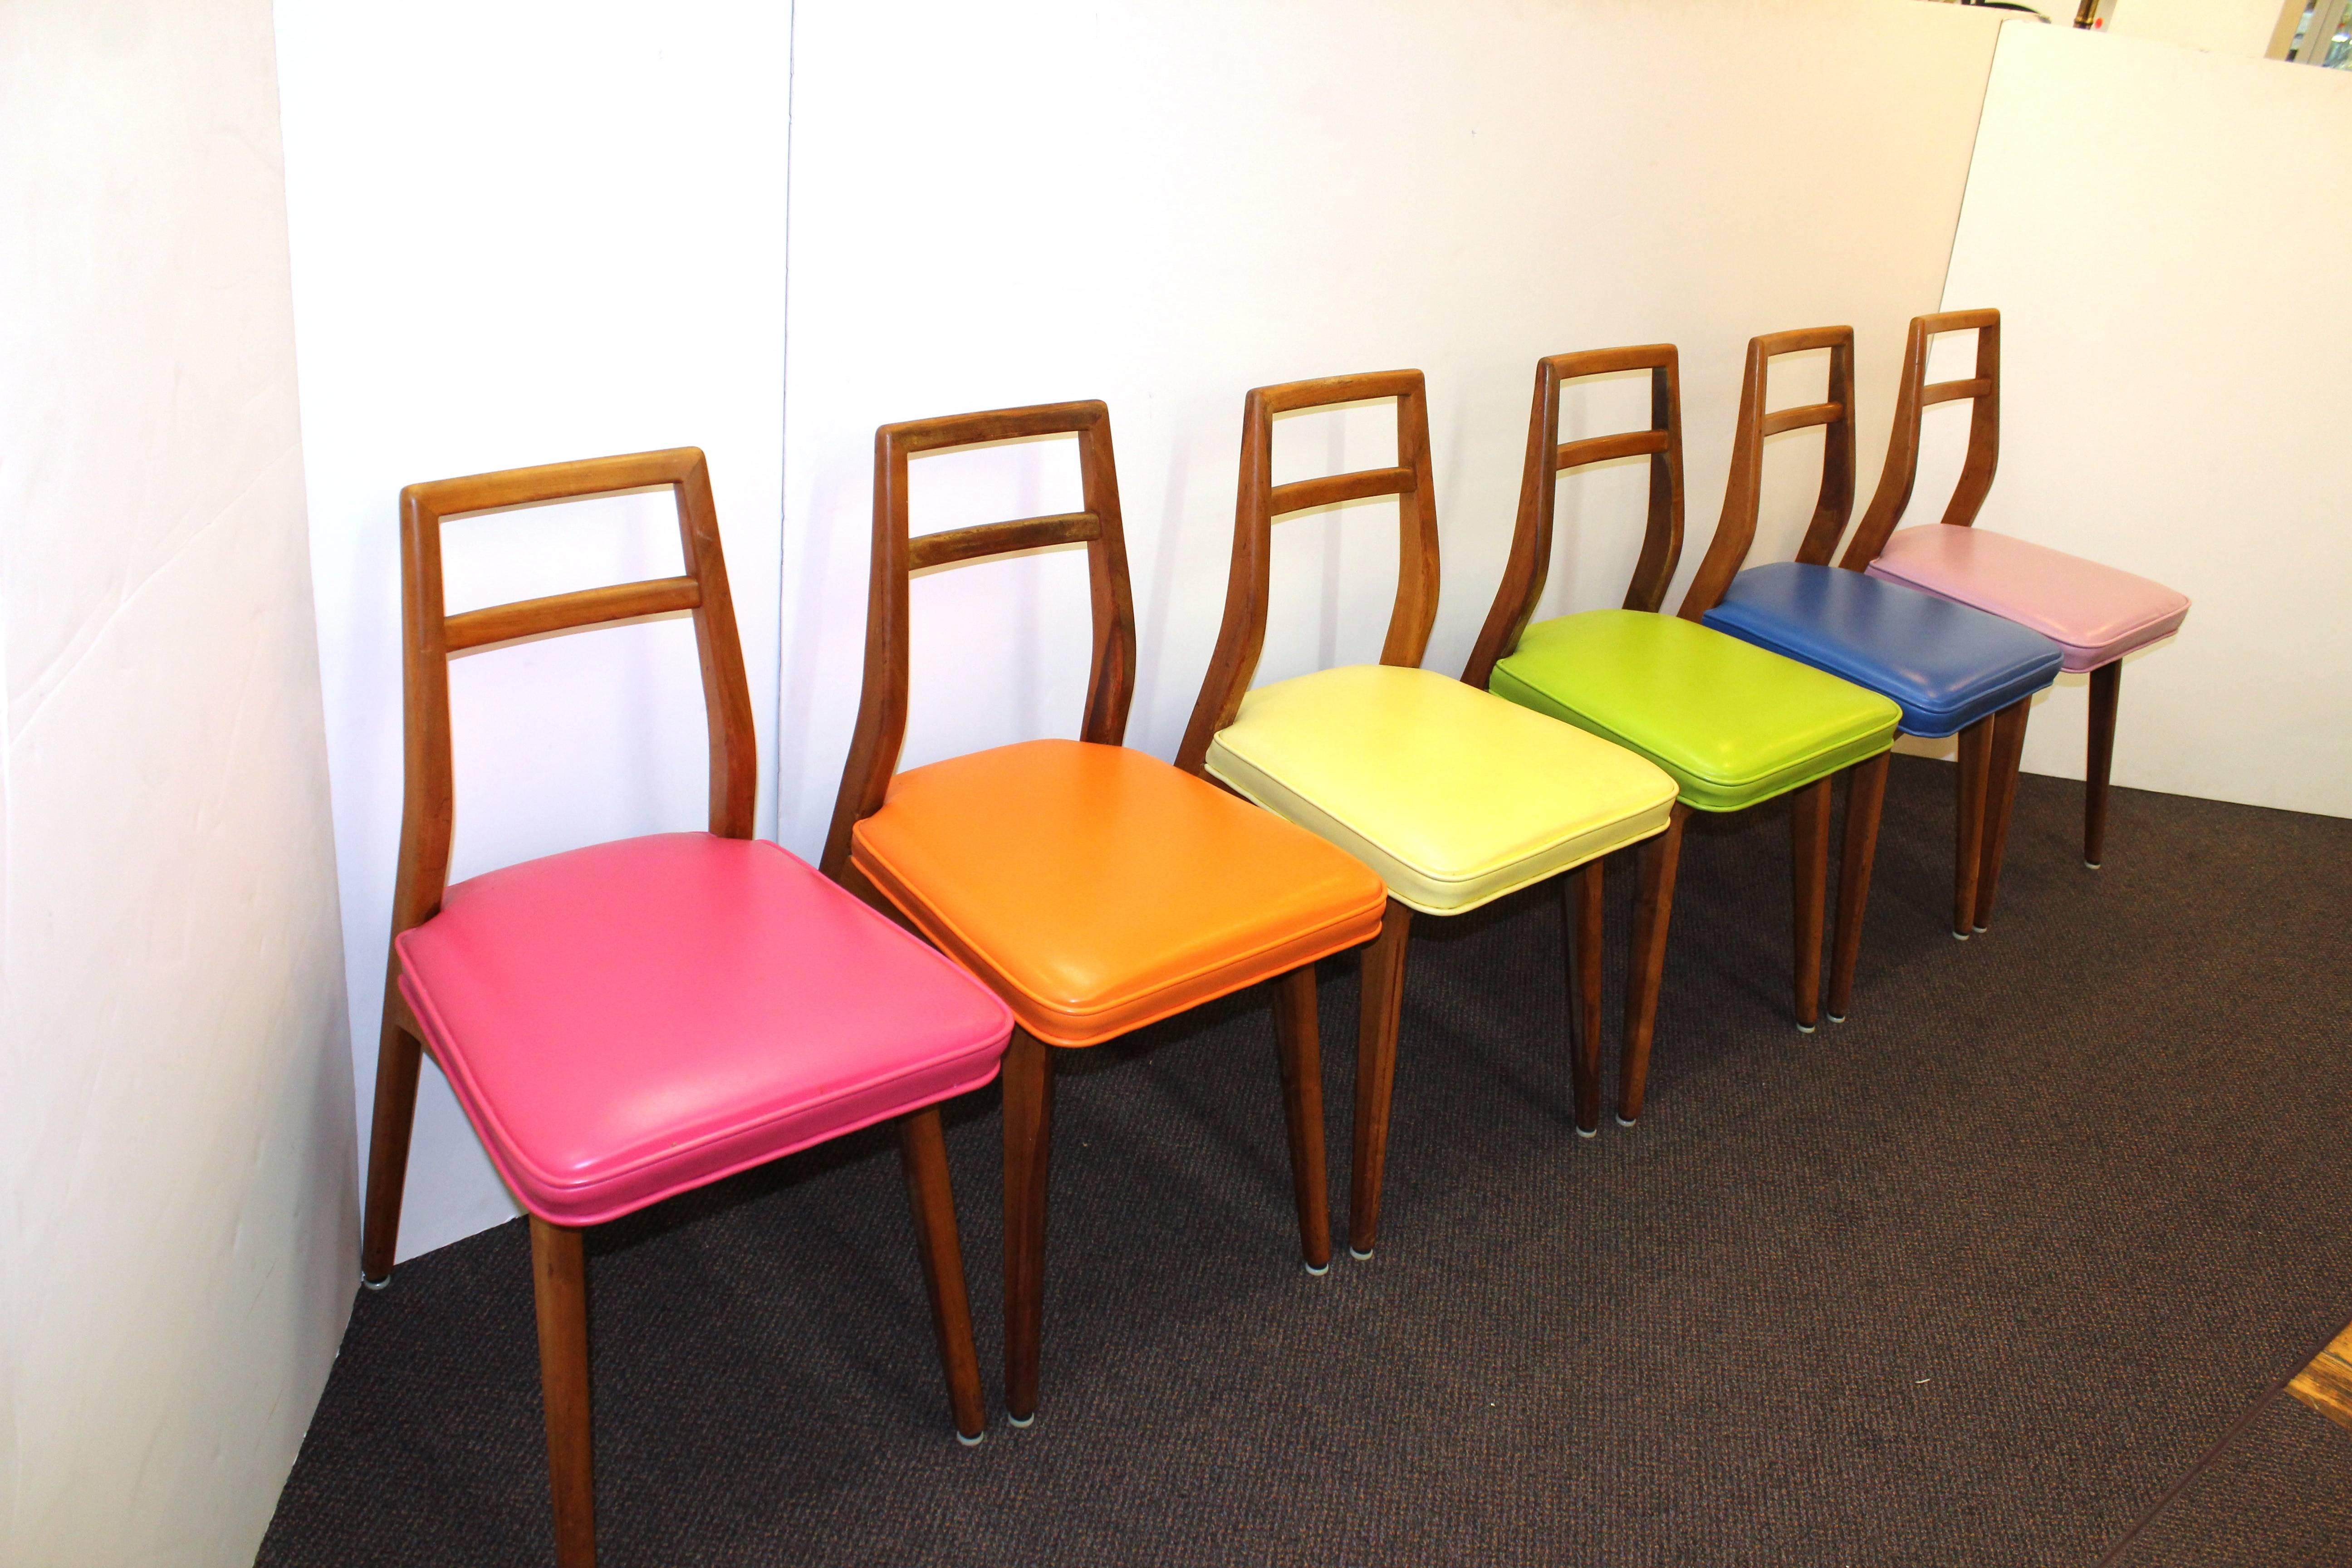 A set of six dining chairs each later re-upholstered in pink, orange, yellow, green, blue and lilac upholstery. 

110518.